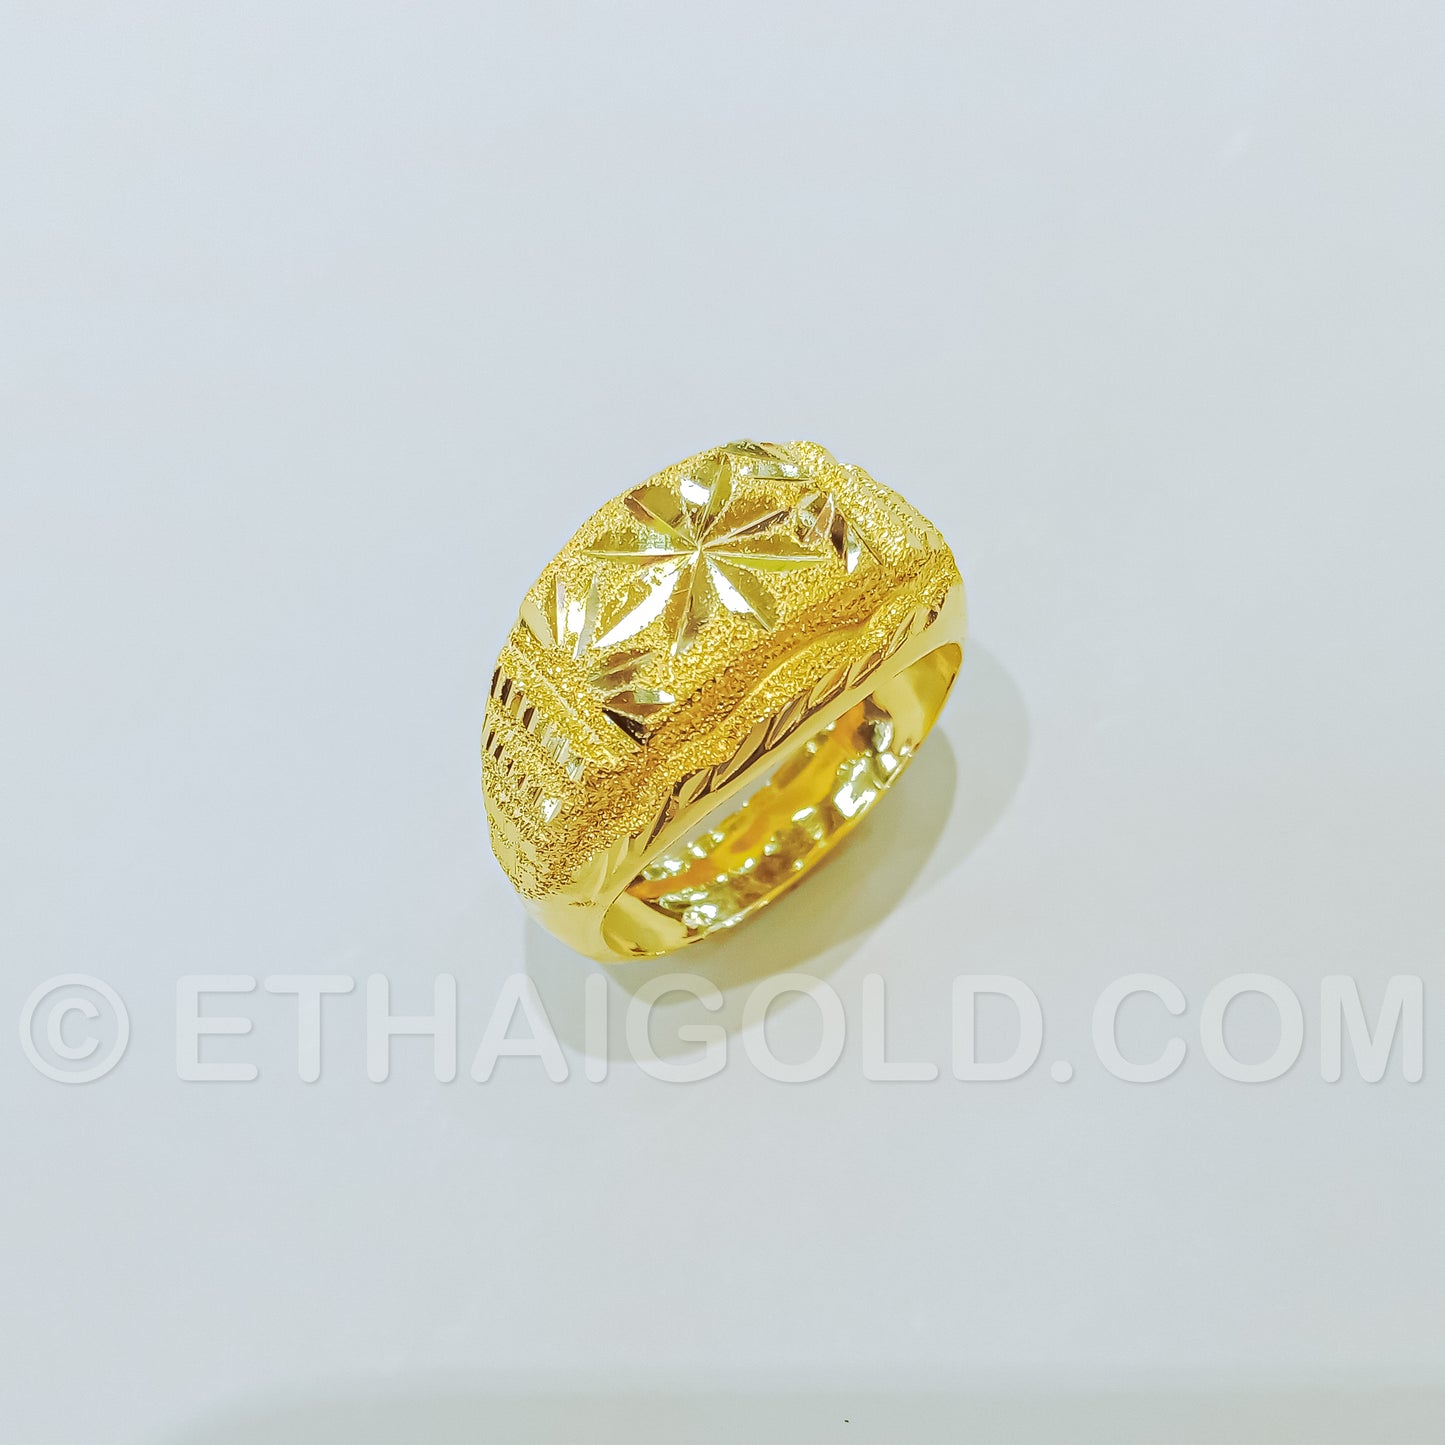 1/2 BAHT POLISHED SPARKLING DIAMOND-CUT HOLLOW CLASSIC RING IN 23K GOLD (ID: R0902S)